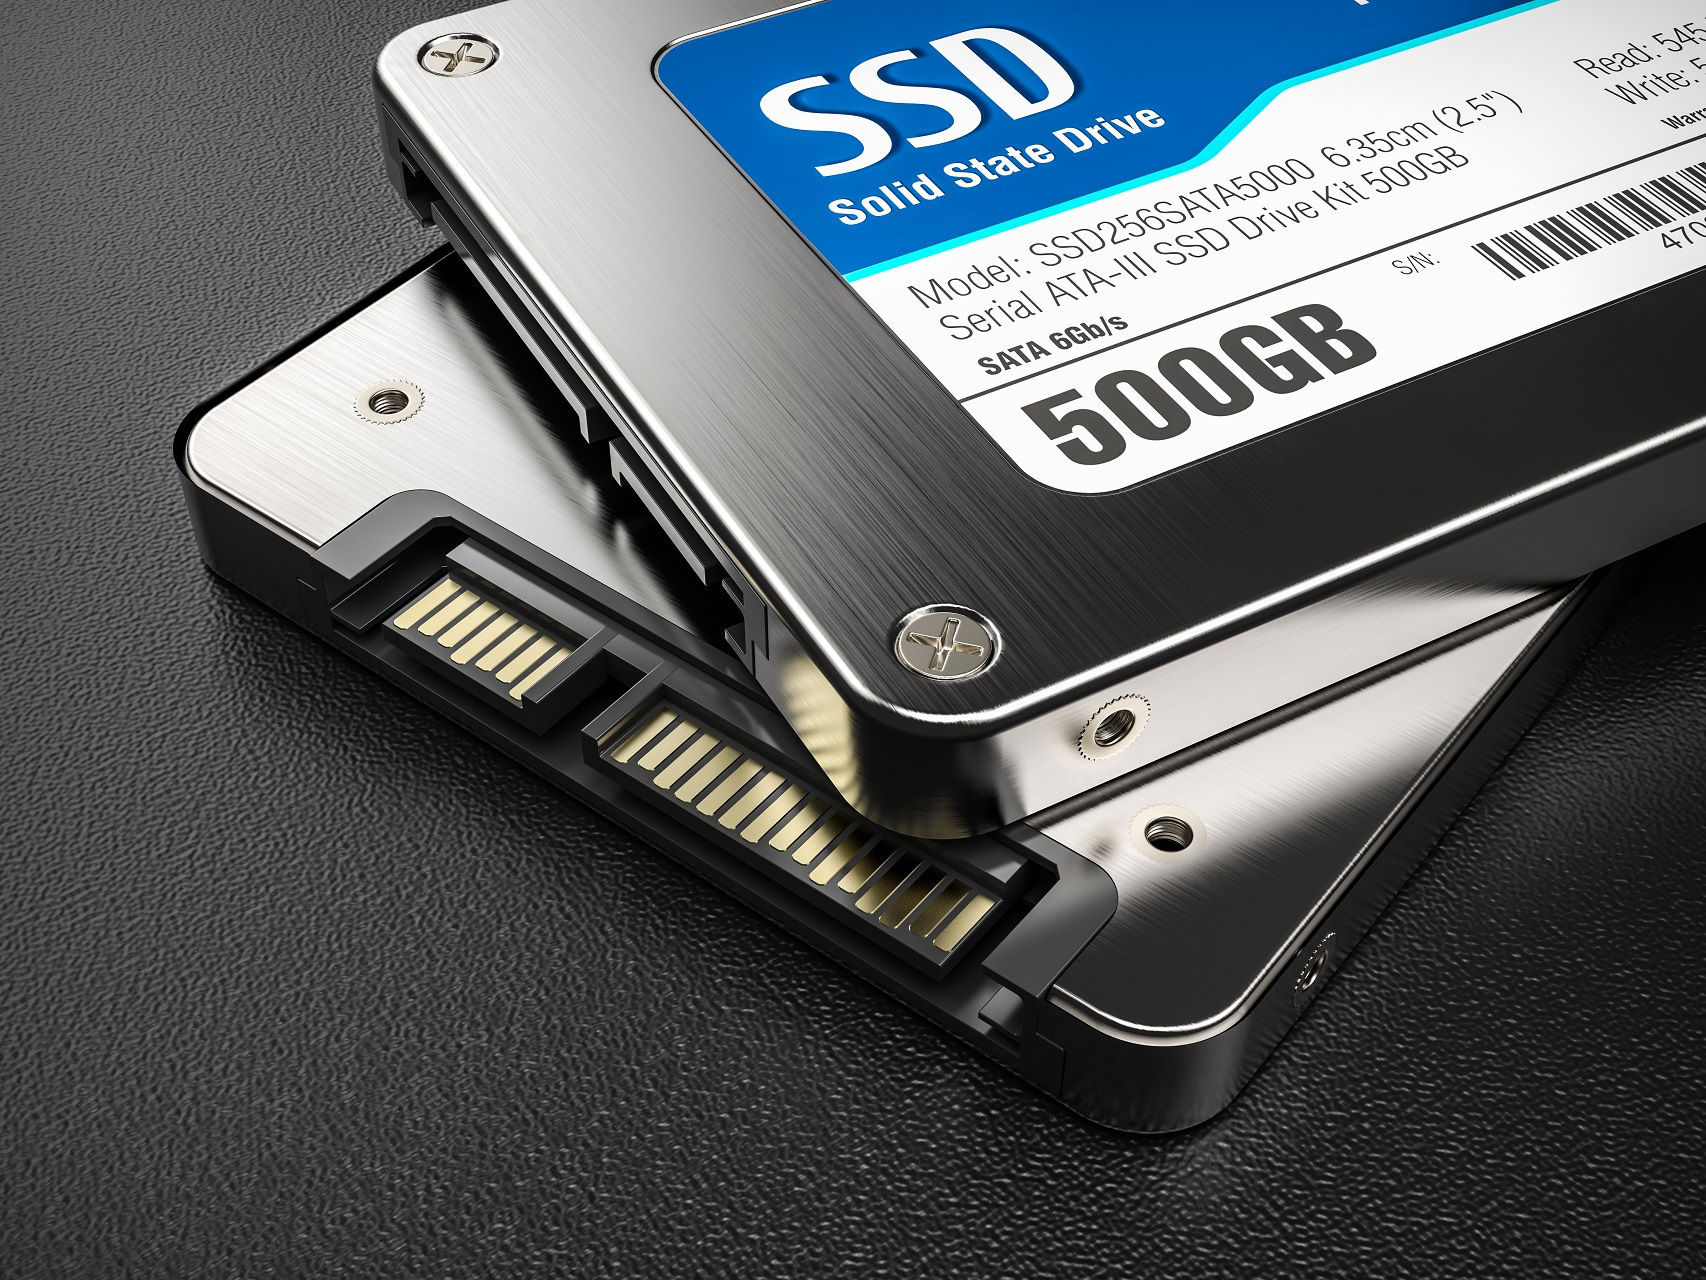 What can I do if I can’t install Windows 10 on SSD